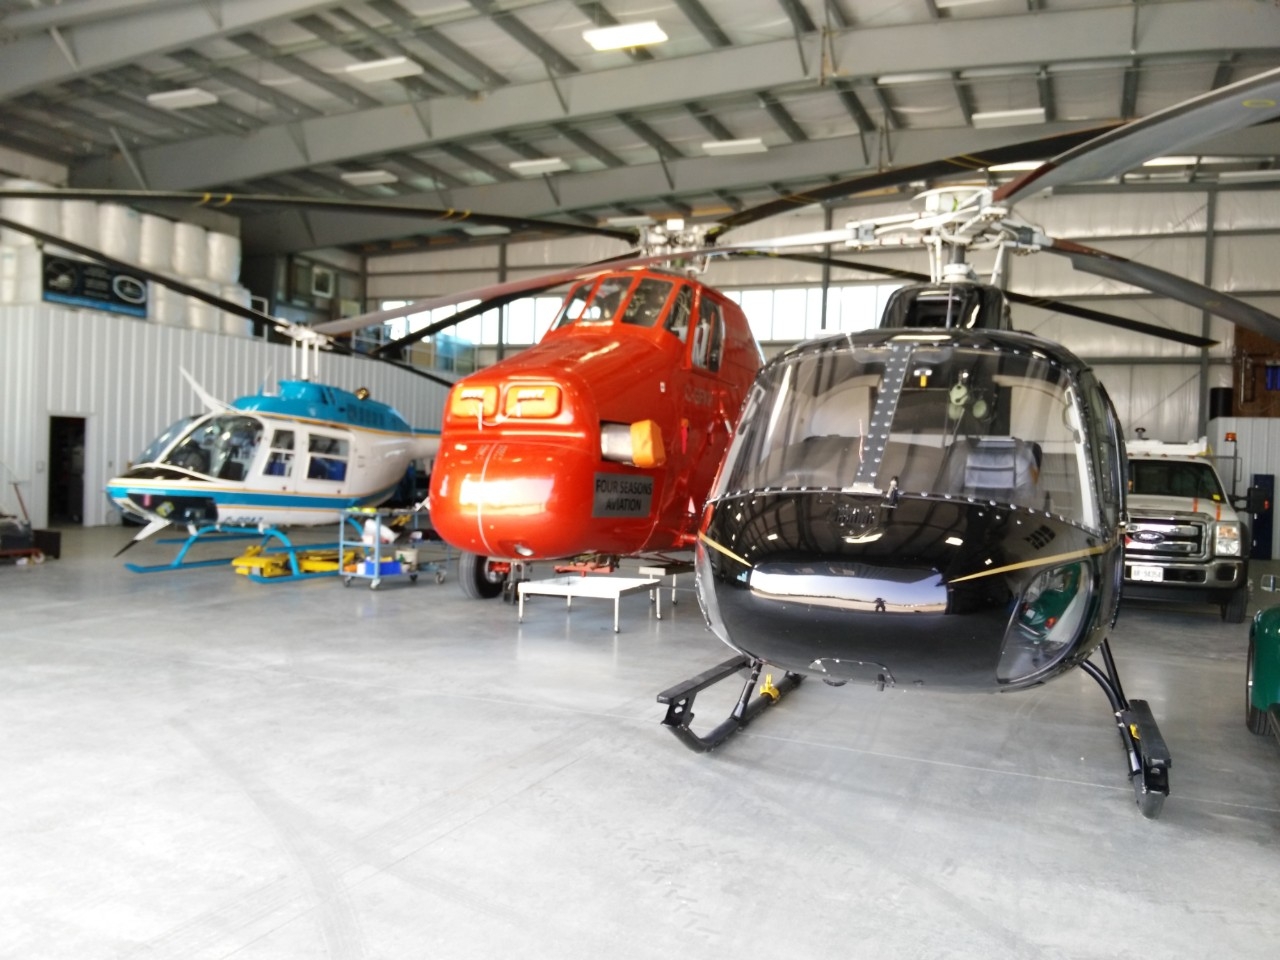 Helicopters for Remote Sensing